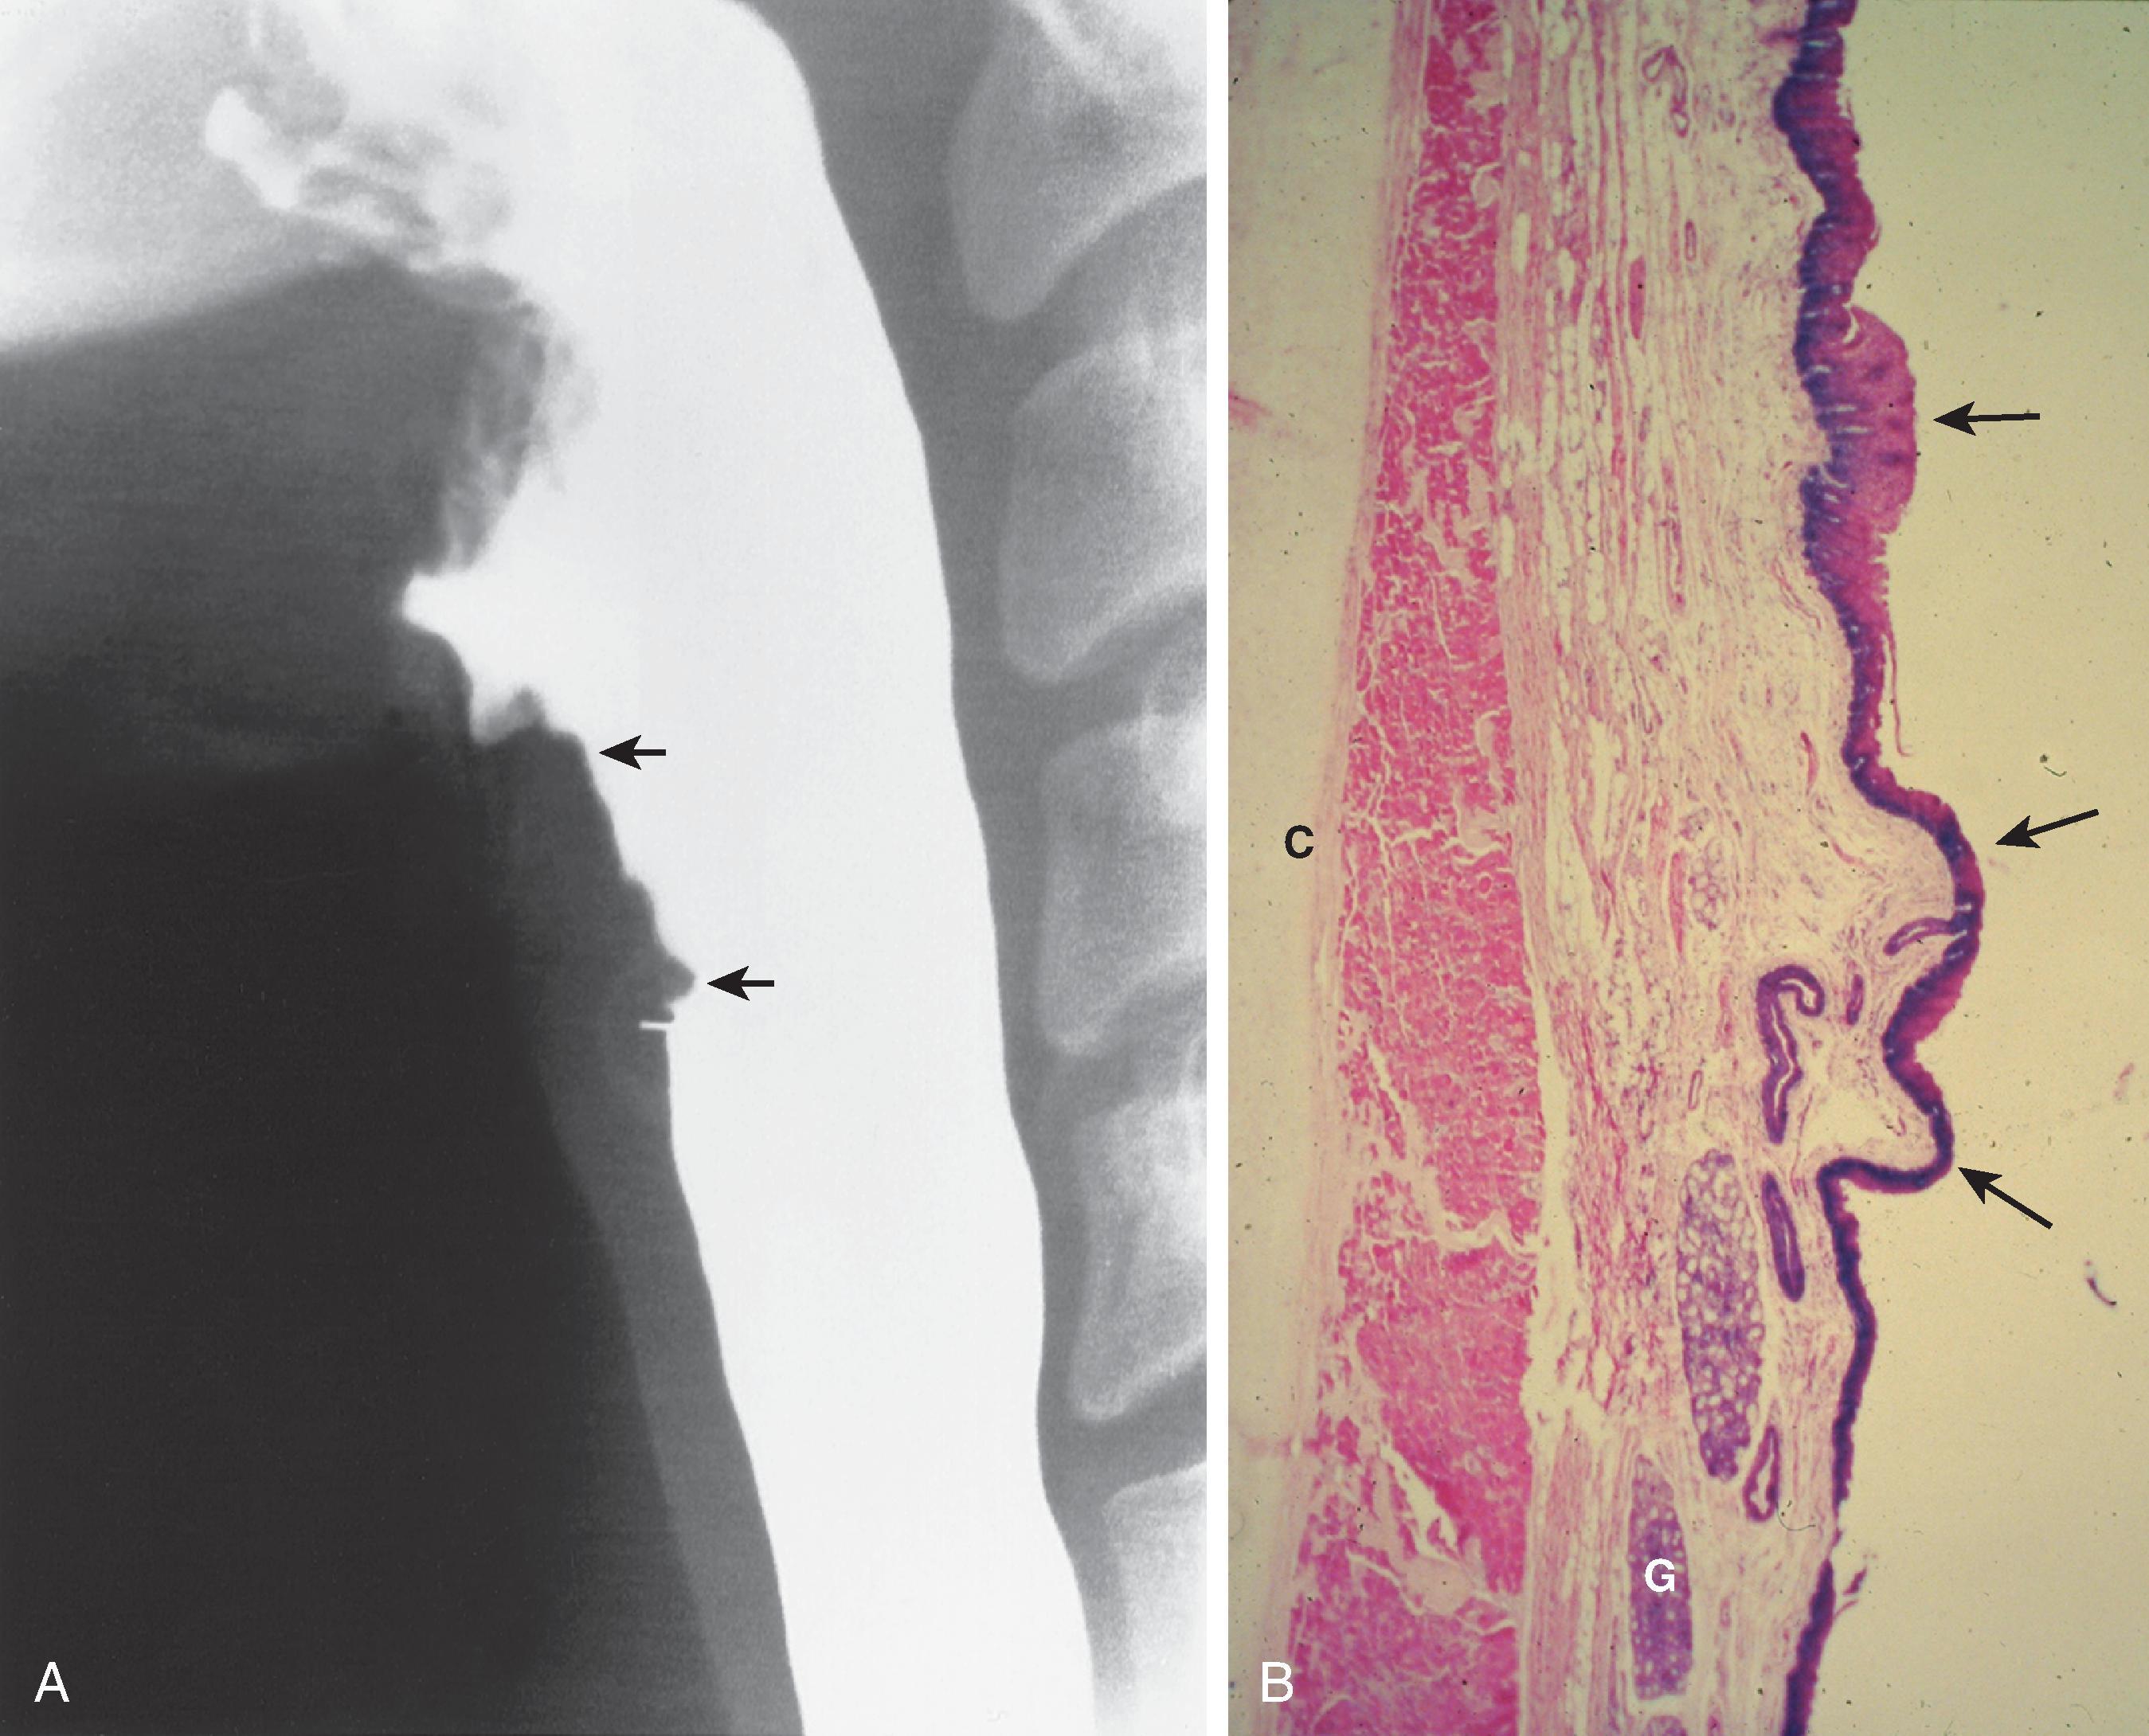 Fig. 4.6, The “postcricoid defect.” (A) On a lateral view of the pharynx during swallowing, redundant mucosa on the anterior wall of the pharyngoesophageal segment just posterior to the cricoid cartilage has an undulating, nodular contour ( arrows ). To rule out a subtle stricture, web, or infiltrating lesion, the radiologist must be certain that this nodularity changes in size and shape and flattens during swallowing. (B) Vertically oriented, low-power photomicrograph just posterior to the cricoid cartilage (C). The squamous epithelium has an undulating contour ( arrows ), accounting for the radiographic findings in (A). The tunica propria is thick, with abundant fat and several minor salivary glands ( G ) (H&E stain, ×10).